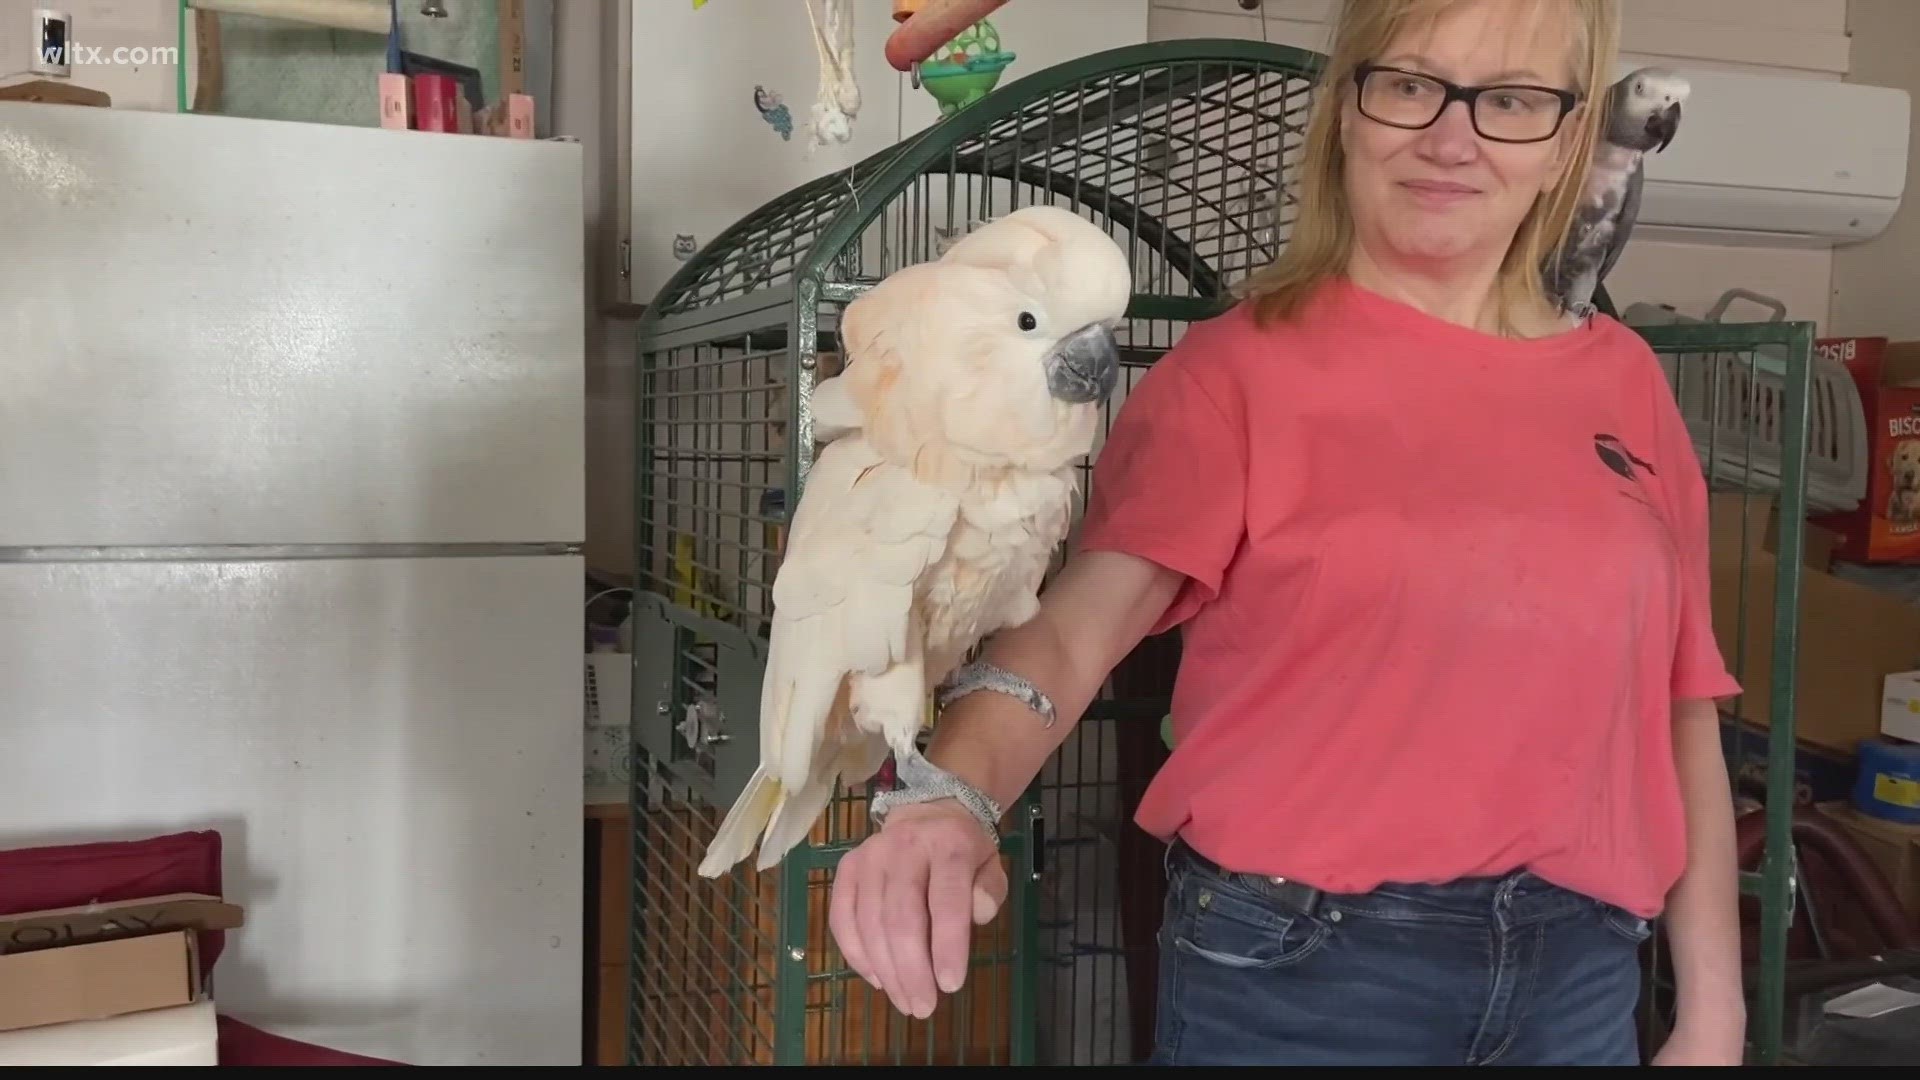 Majestic Wings Rescue in Cassatt, South Carolina aims to give a sanctuary for unwanted parrots.